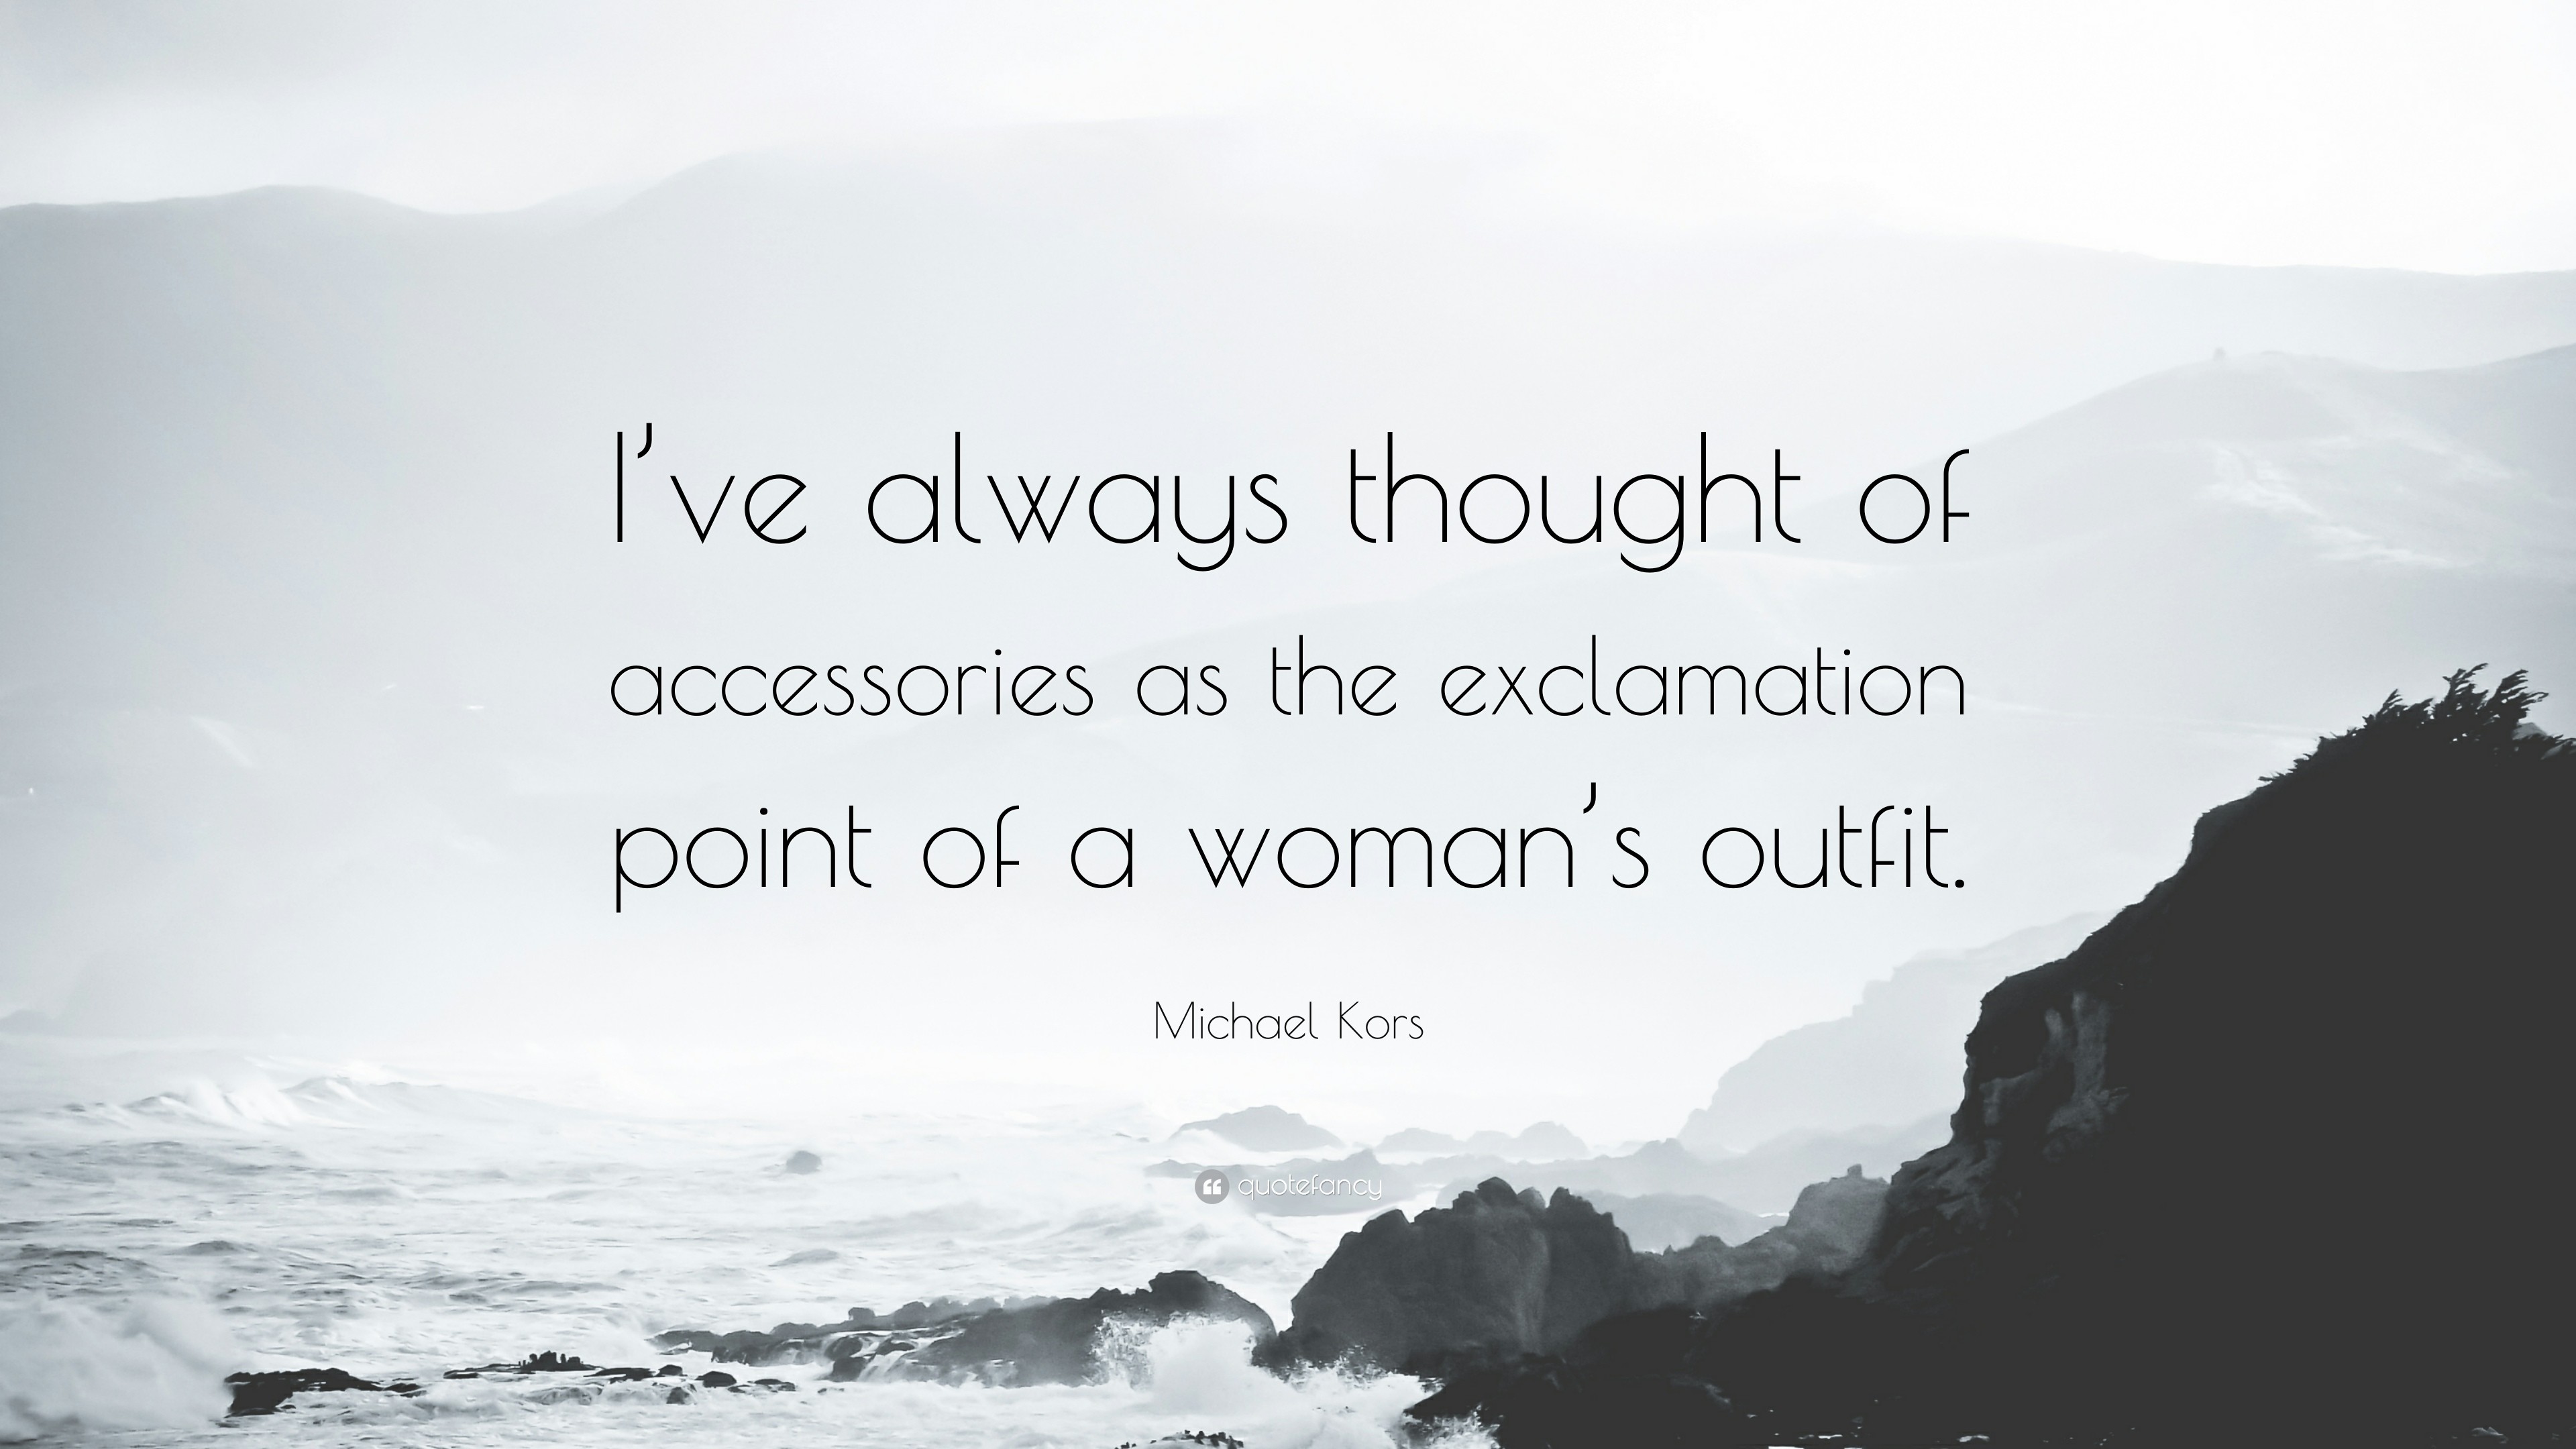 3840x2160 Michael Kors Quote: “I've always thought of accessories as the exclamation  point